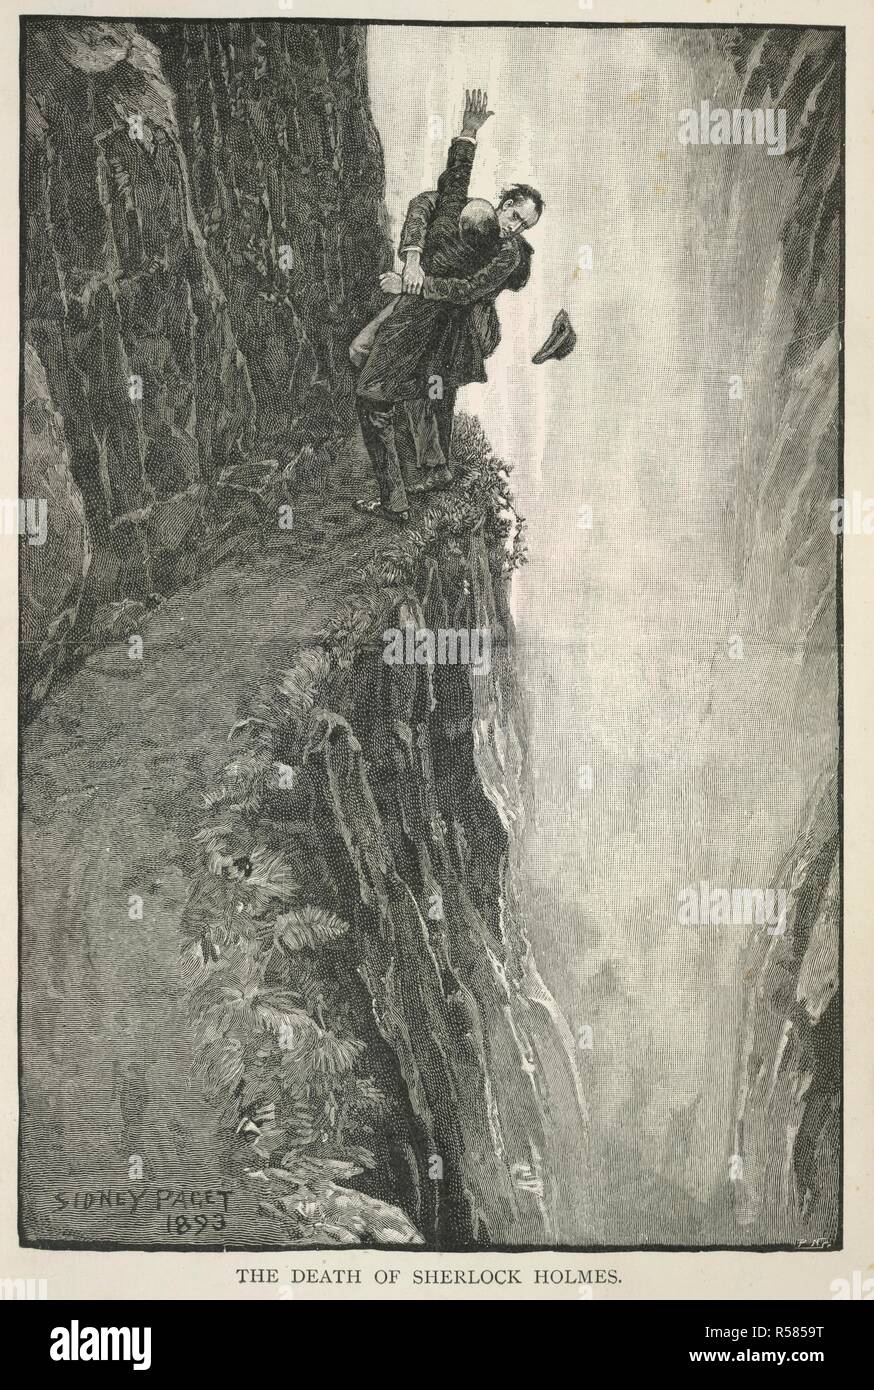 'The death of Sherlock Holmes.' Sherlock Holmes fighting with Professor Moriarty at the Reichenbach Falls in May 1891, where he supposedly fell to his death. ' Illustration for the story, 'the final problem'. The Memoirs of Sherlock Holmes.. G. Newnes: London, 1894 [1893]. Source: 012634.m.16, frontispiece. Language: English. Author: DOYLE, ARTHUR CONAN. Paget, Sydney. Stock Photo